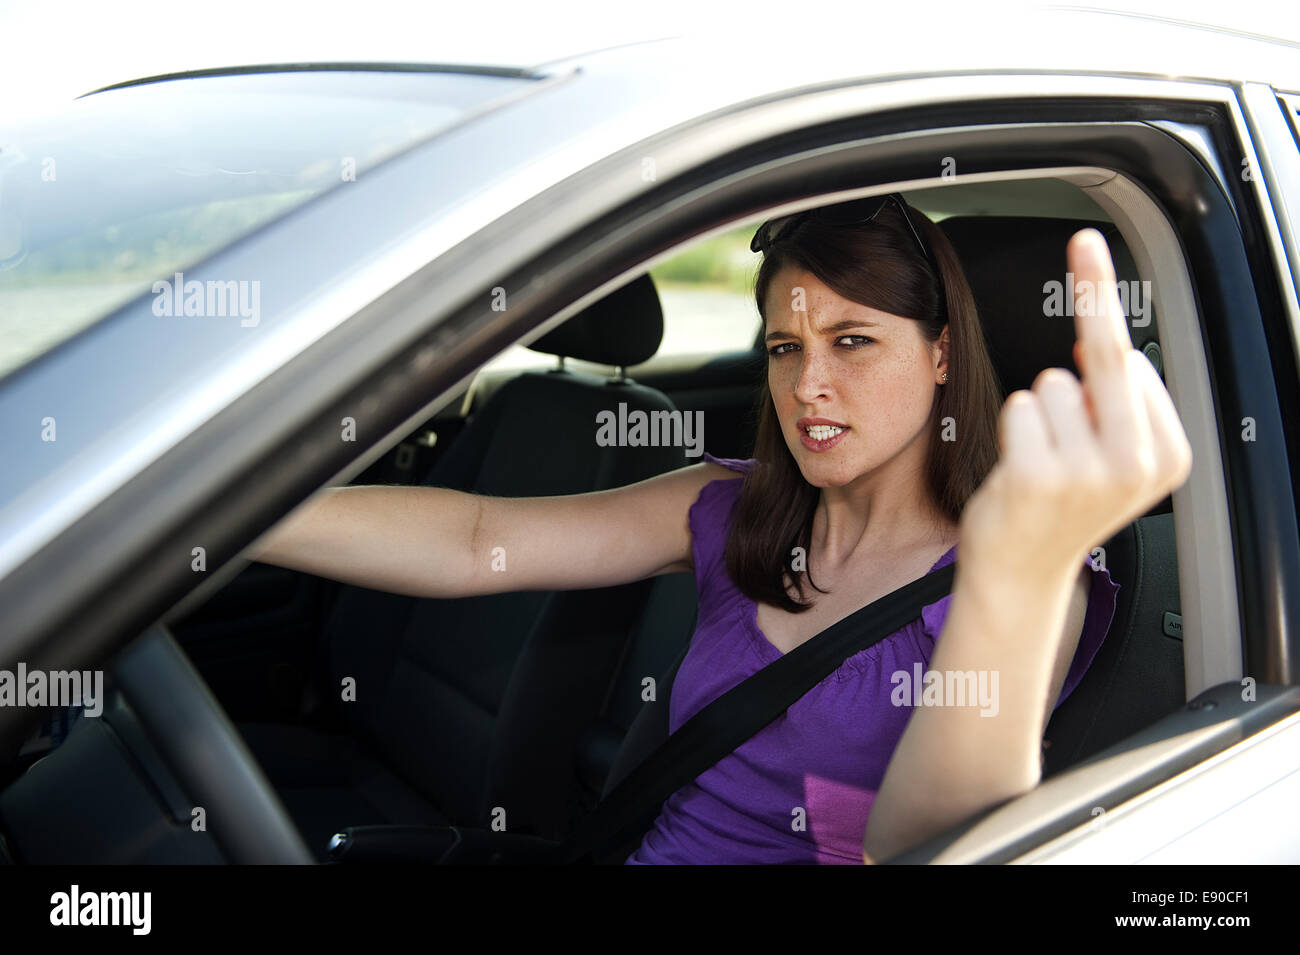 Car driver gives the finger Stock Photo